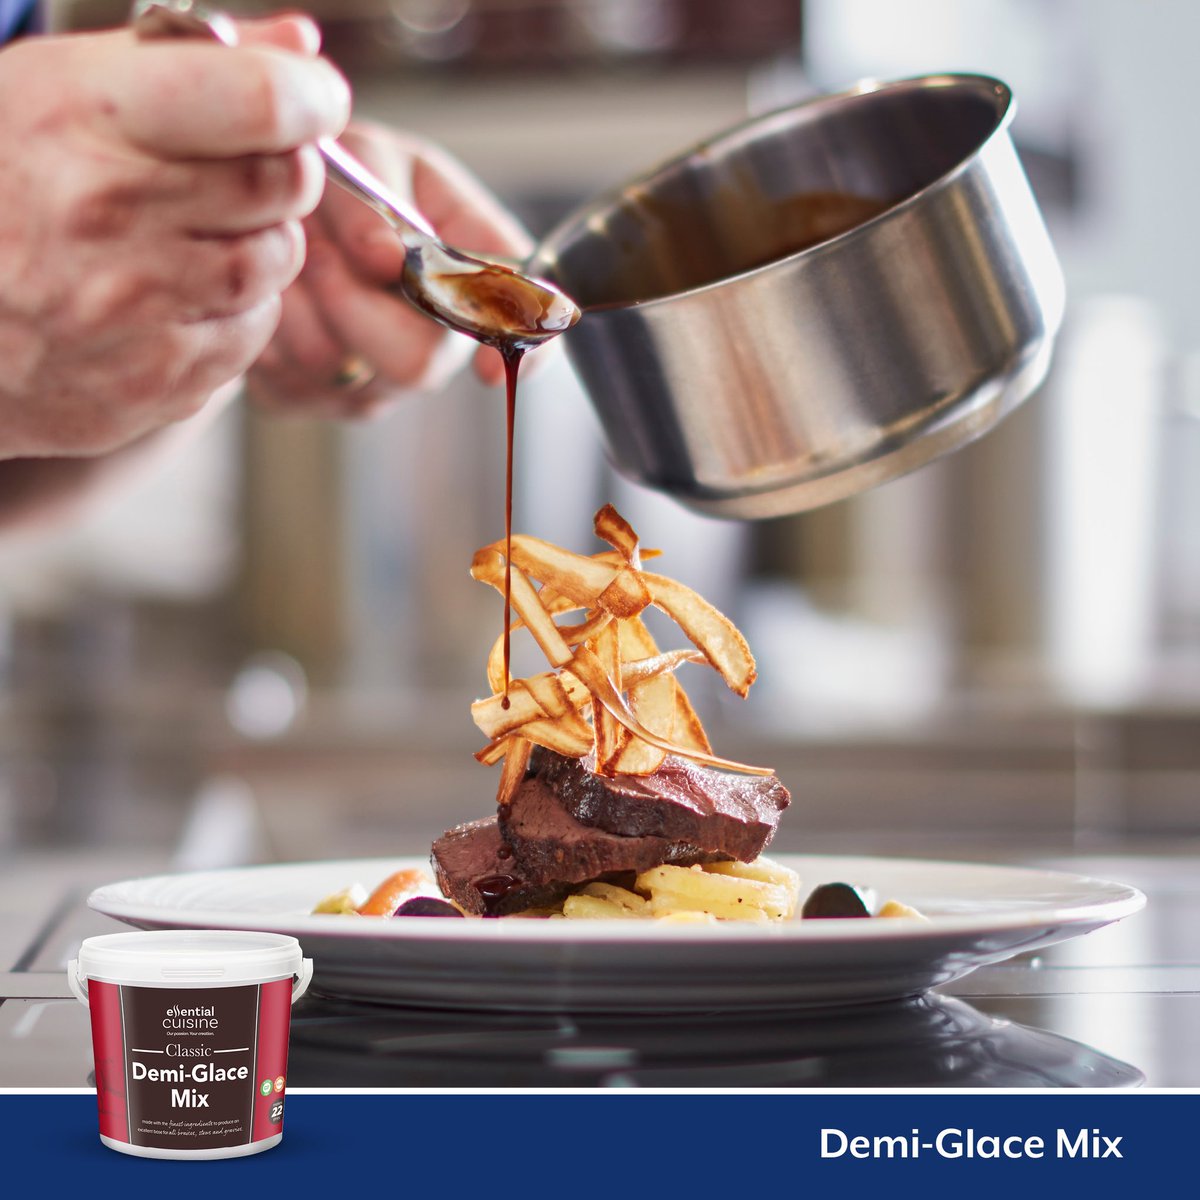 Our NEW Demi-Glace Mix! 😍 💙 Made with the finest ingredients 💙 Meets 2024 salt targets* 💙 No declarable allergens^ 💙 An excellent base for all brown sauces including; braises, stews and gravies 💙 Perfect banqueting ingredient FREE samples - lnkd.in/d5VSJZ5